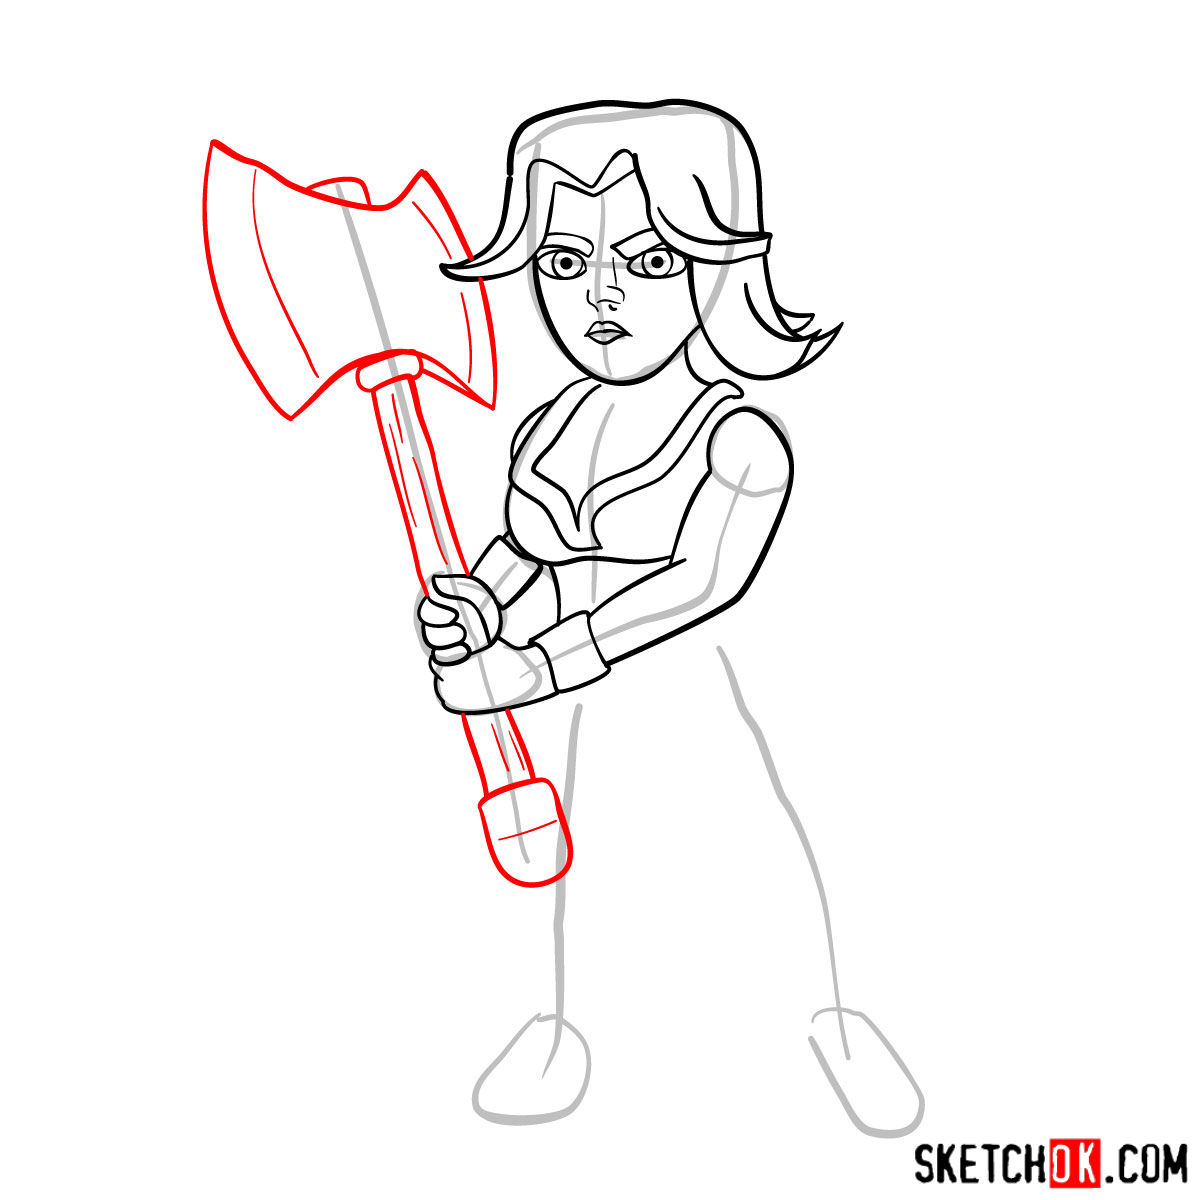 How to draw Valkyrie from Clash of Clans - step 08